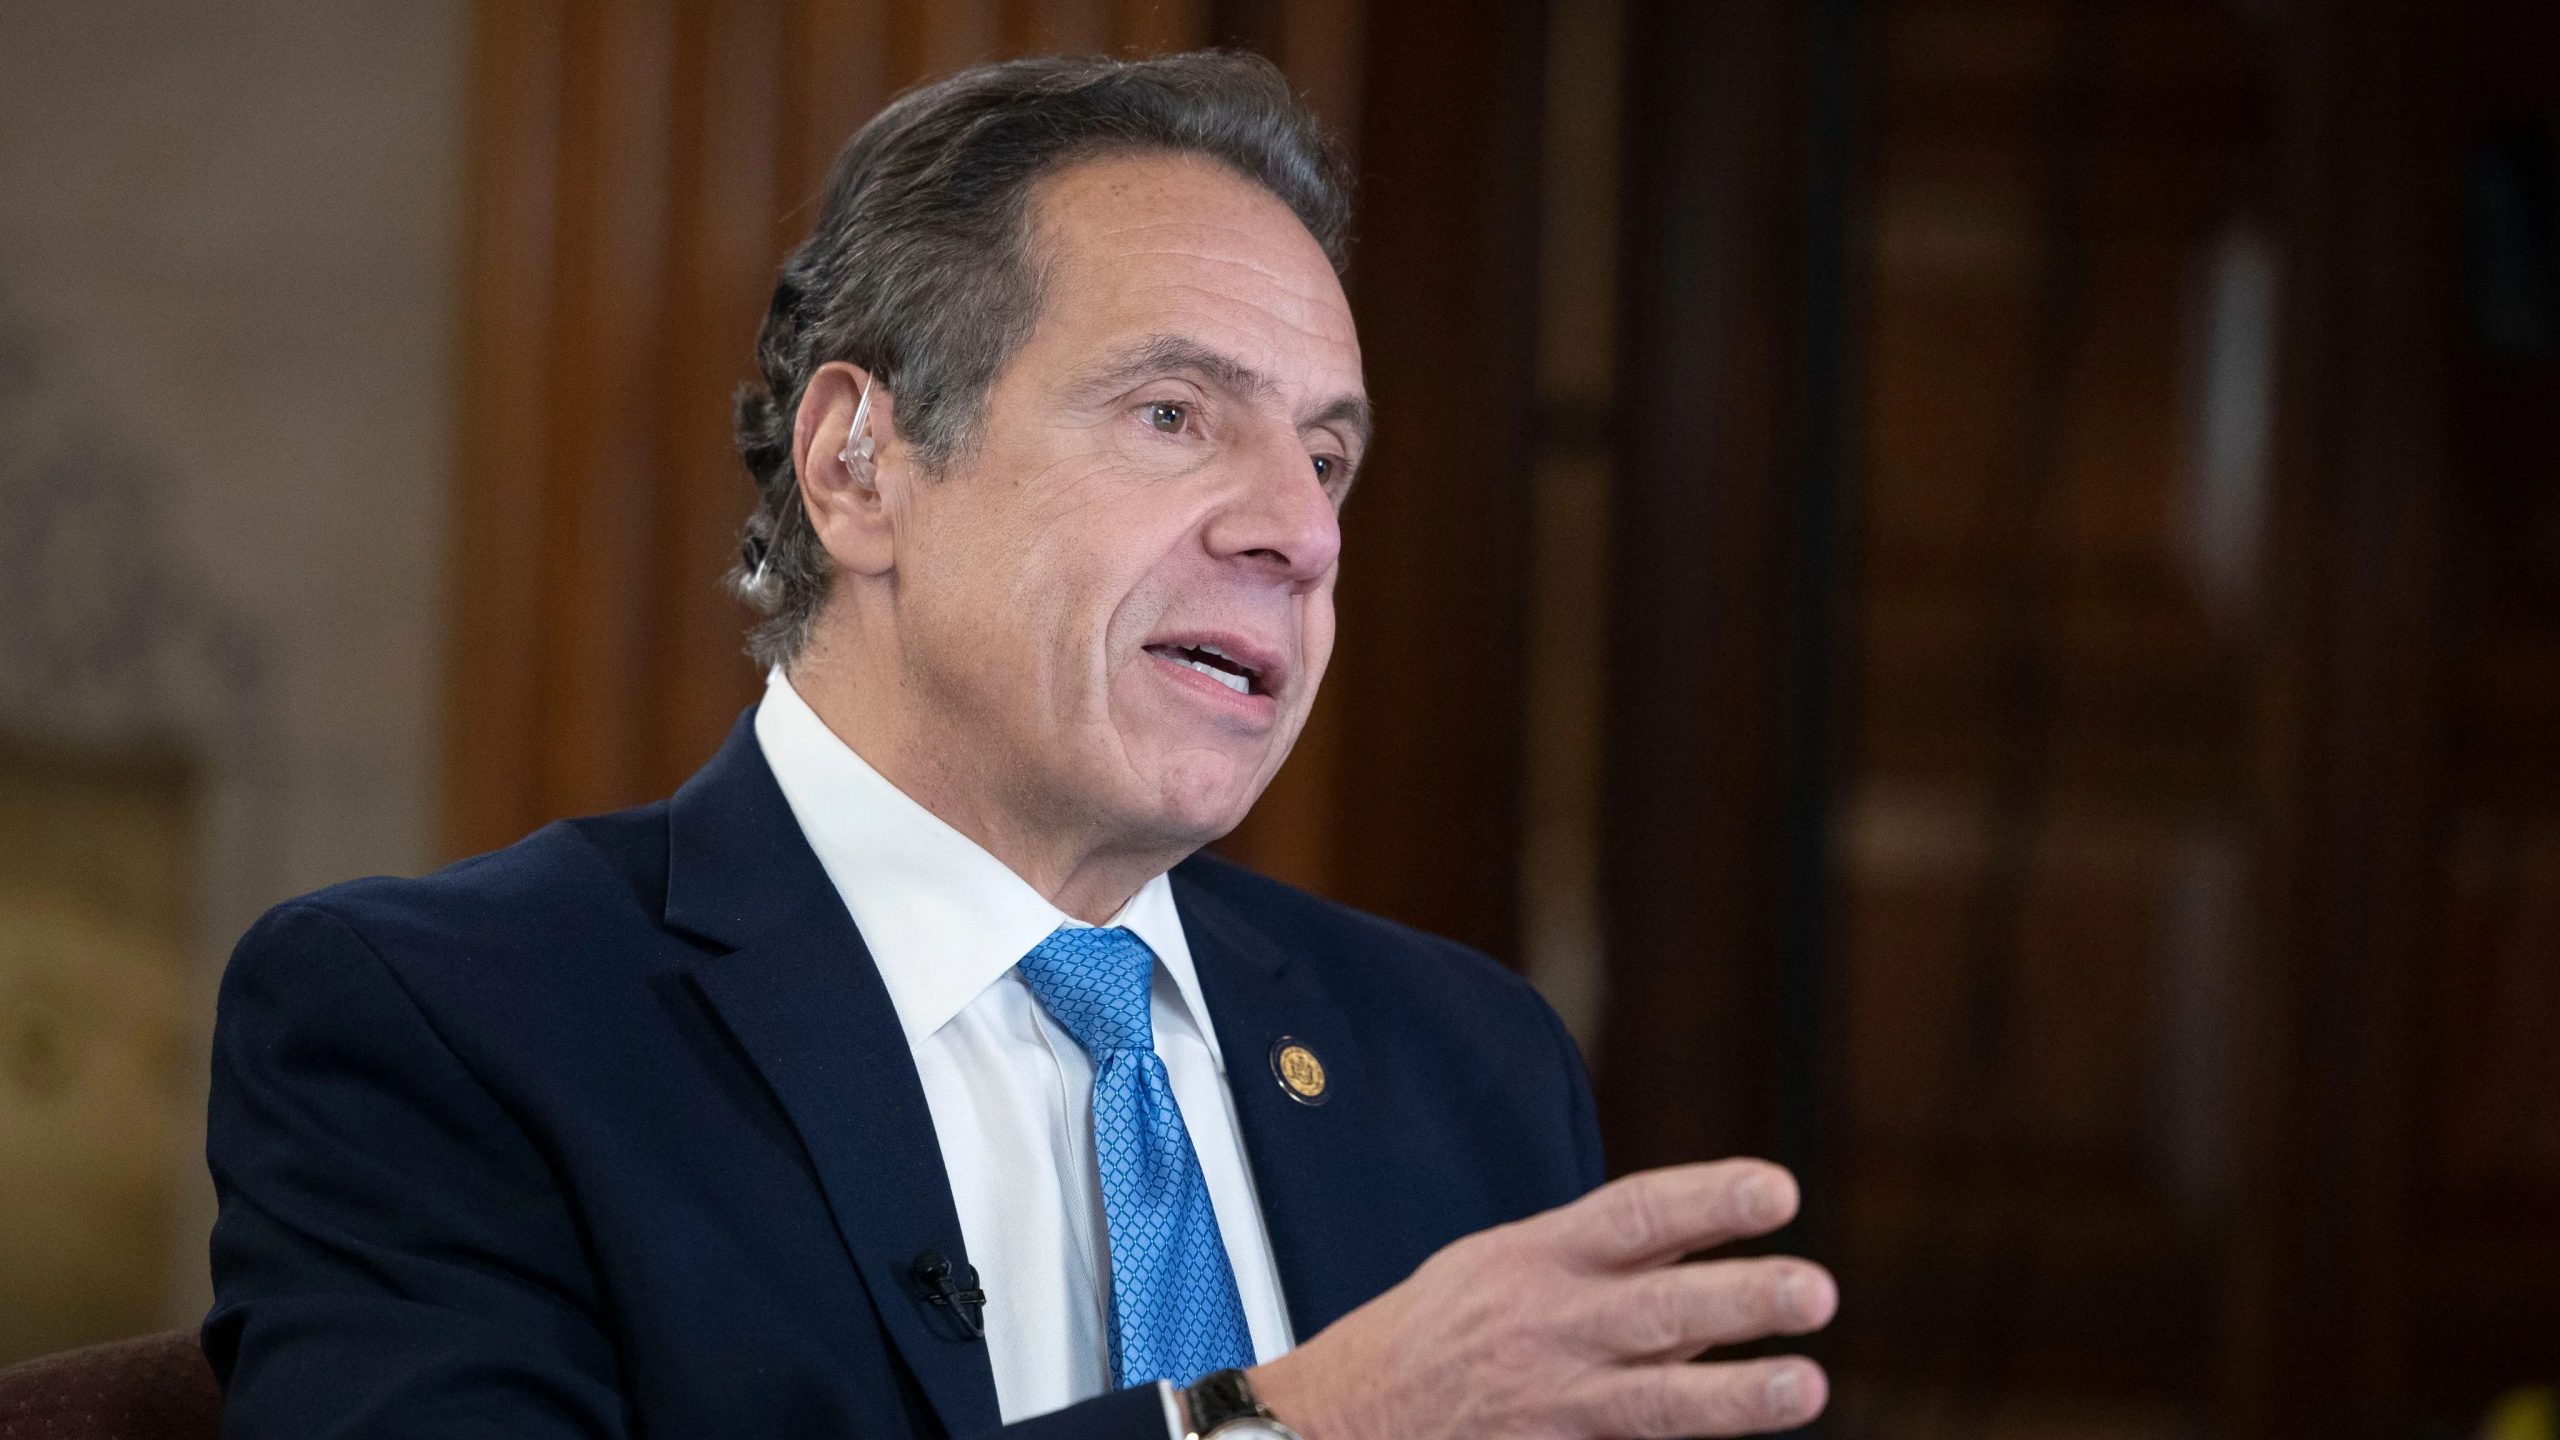 Criminal complaint filed against Andrew Cuomo by former executive assistant